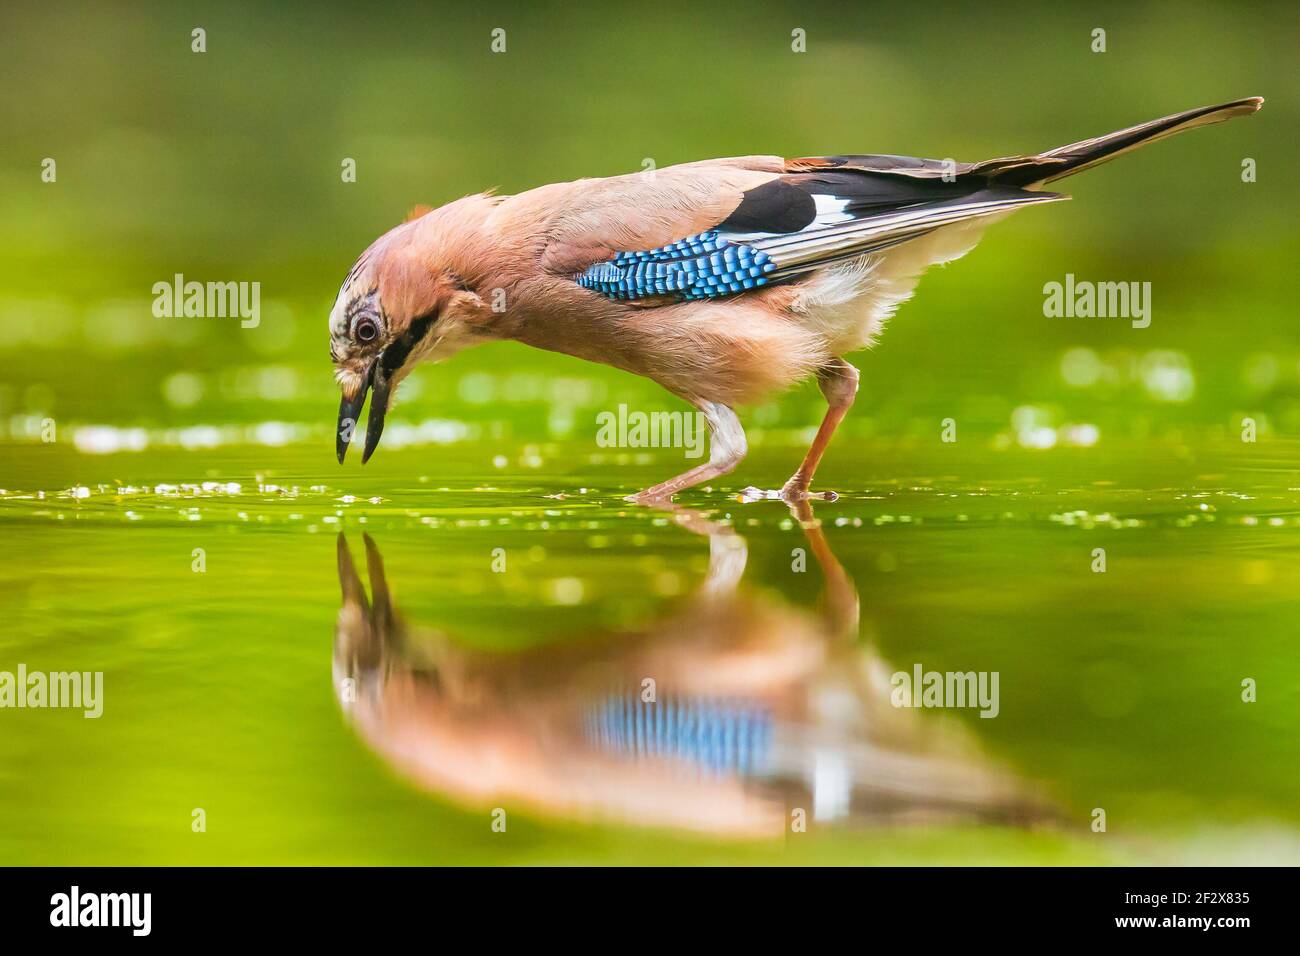 Closeup of a Eurasian jay Garrulus glandarius bird drinking, washing, preening and cleaning in water. Selective focus and low poit of view Stock Photo